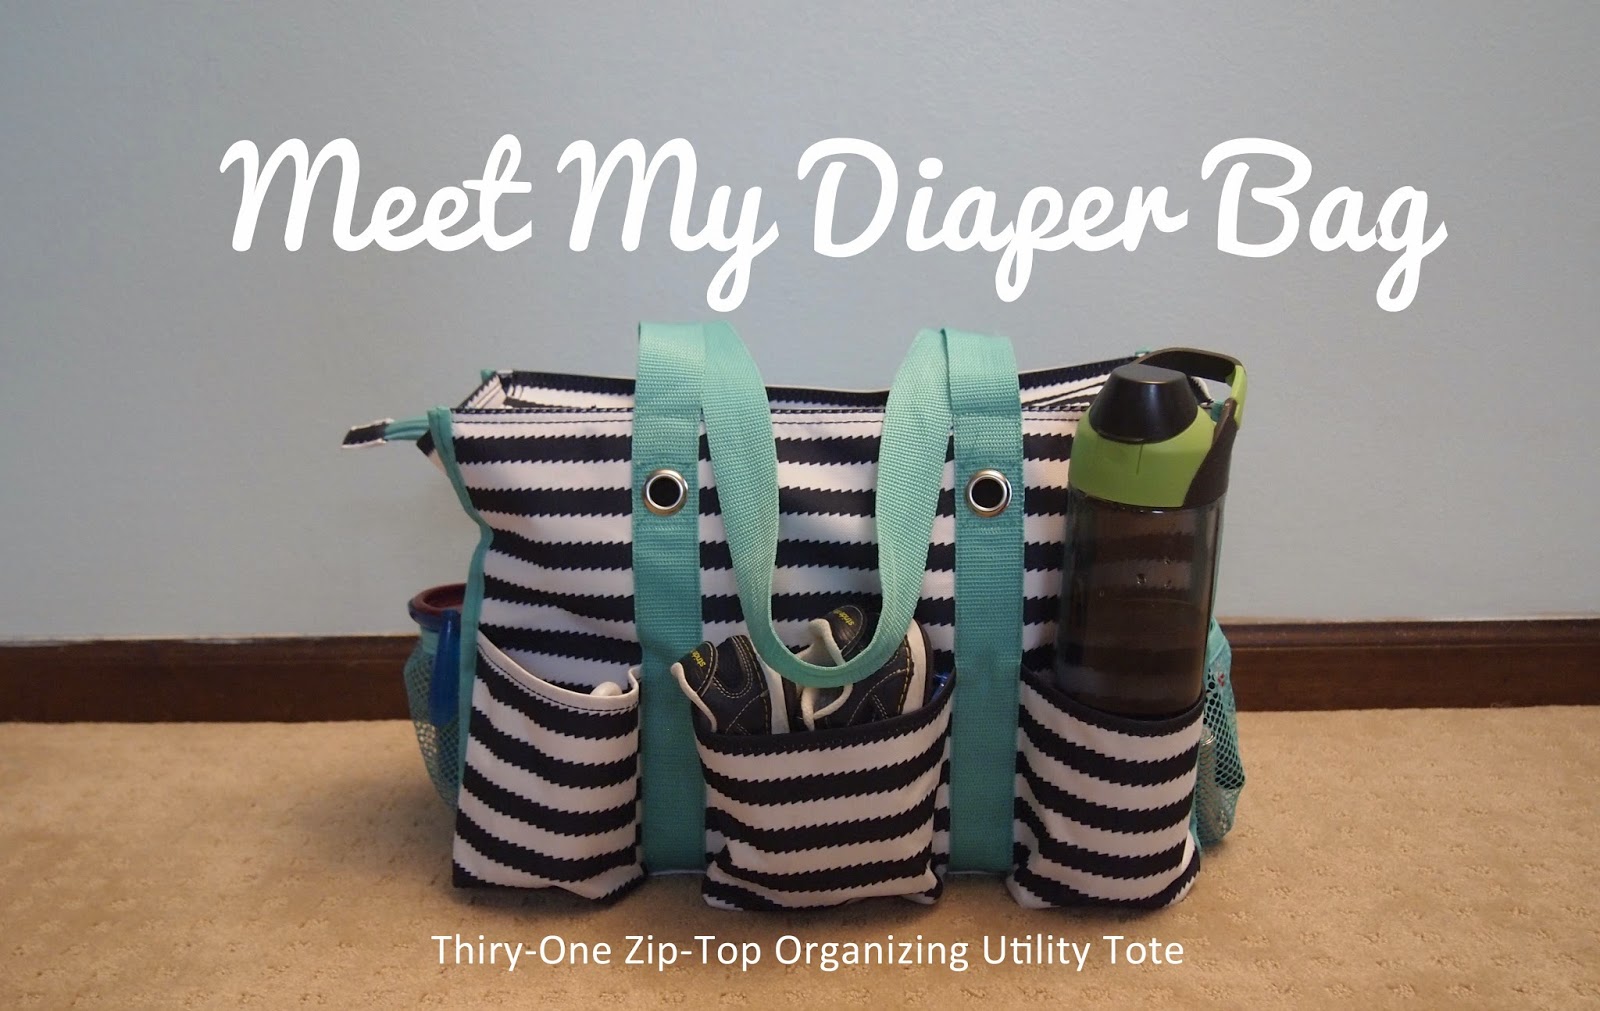 GIVEAWAY 1: Thirty-One